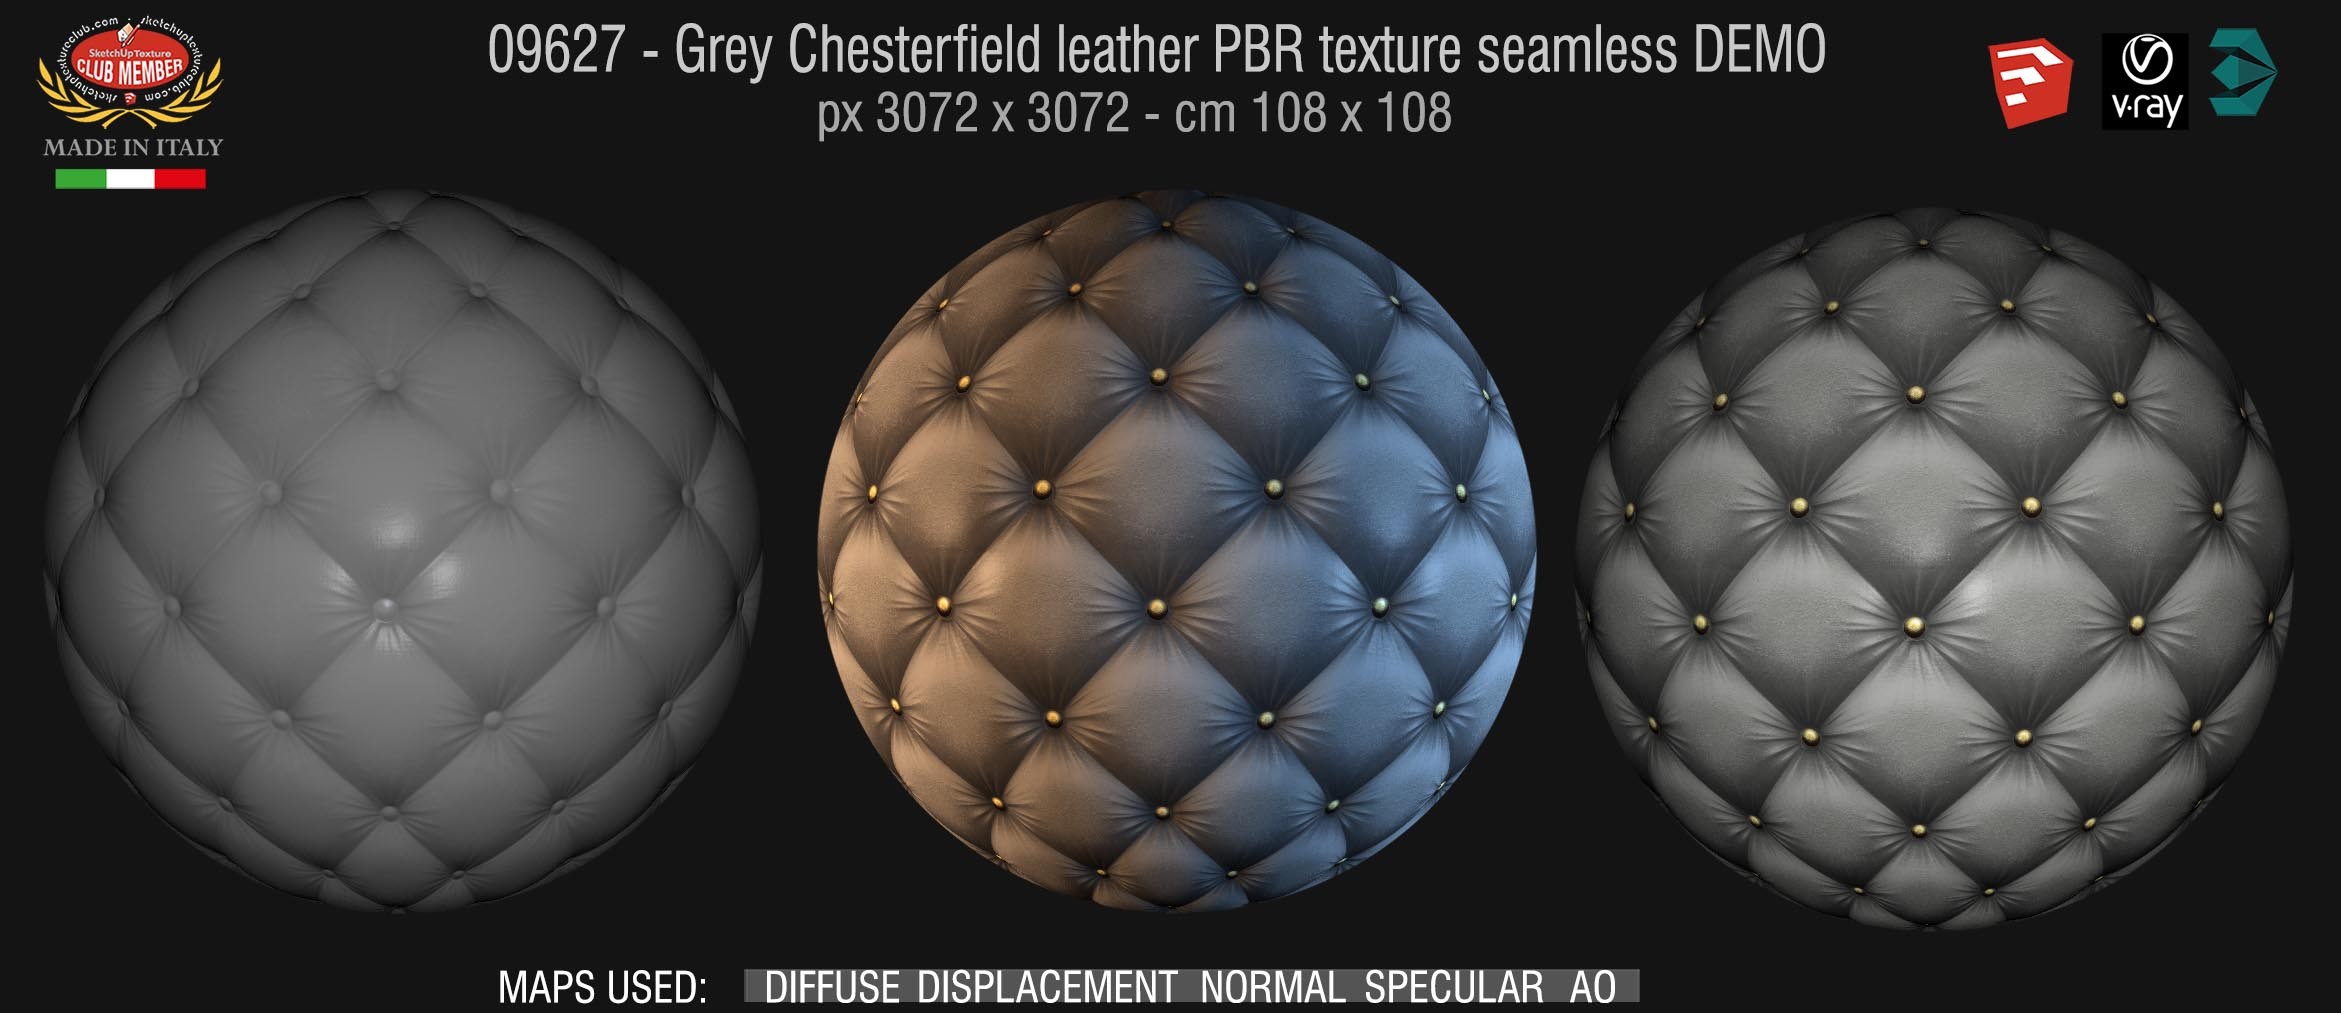 09627 Grey Chesterfield leather PBR texture seamless DEMO